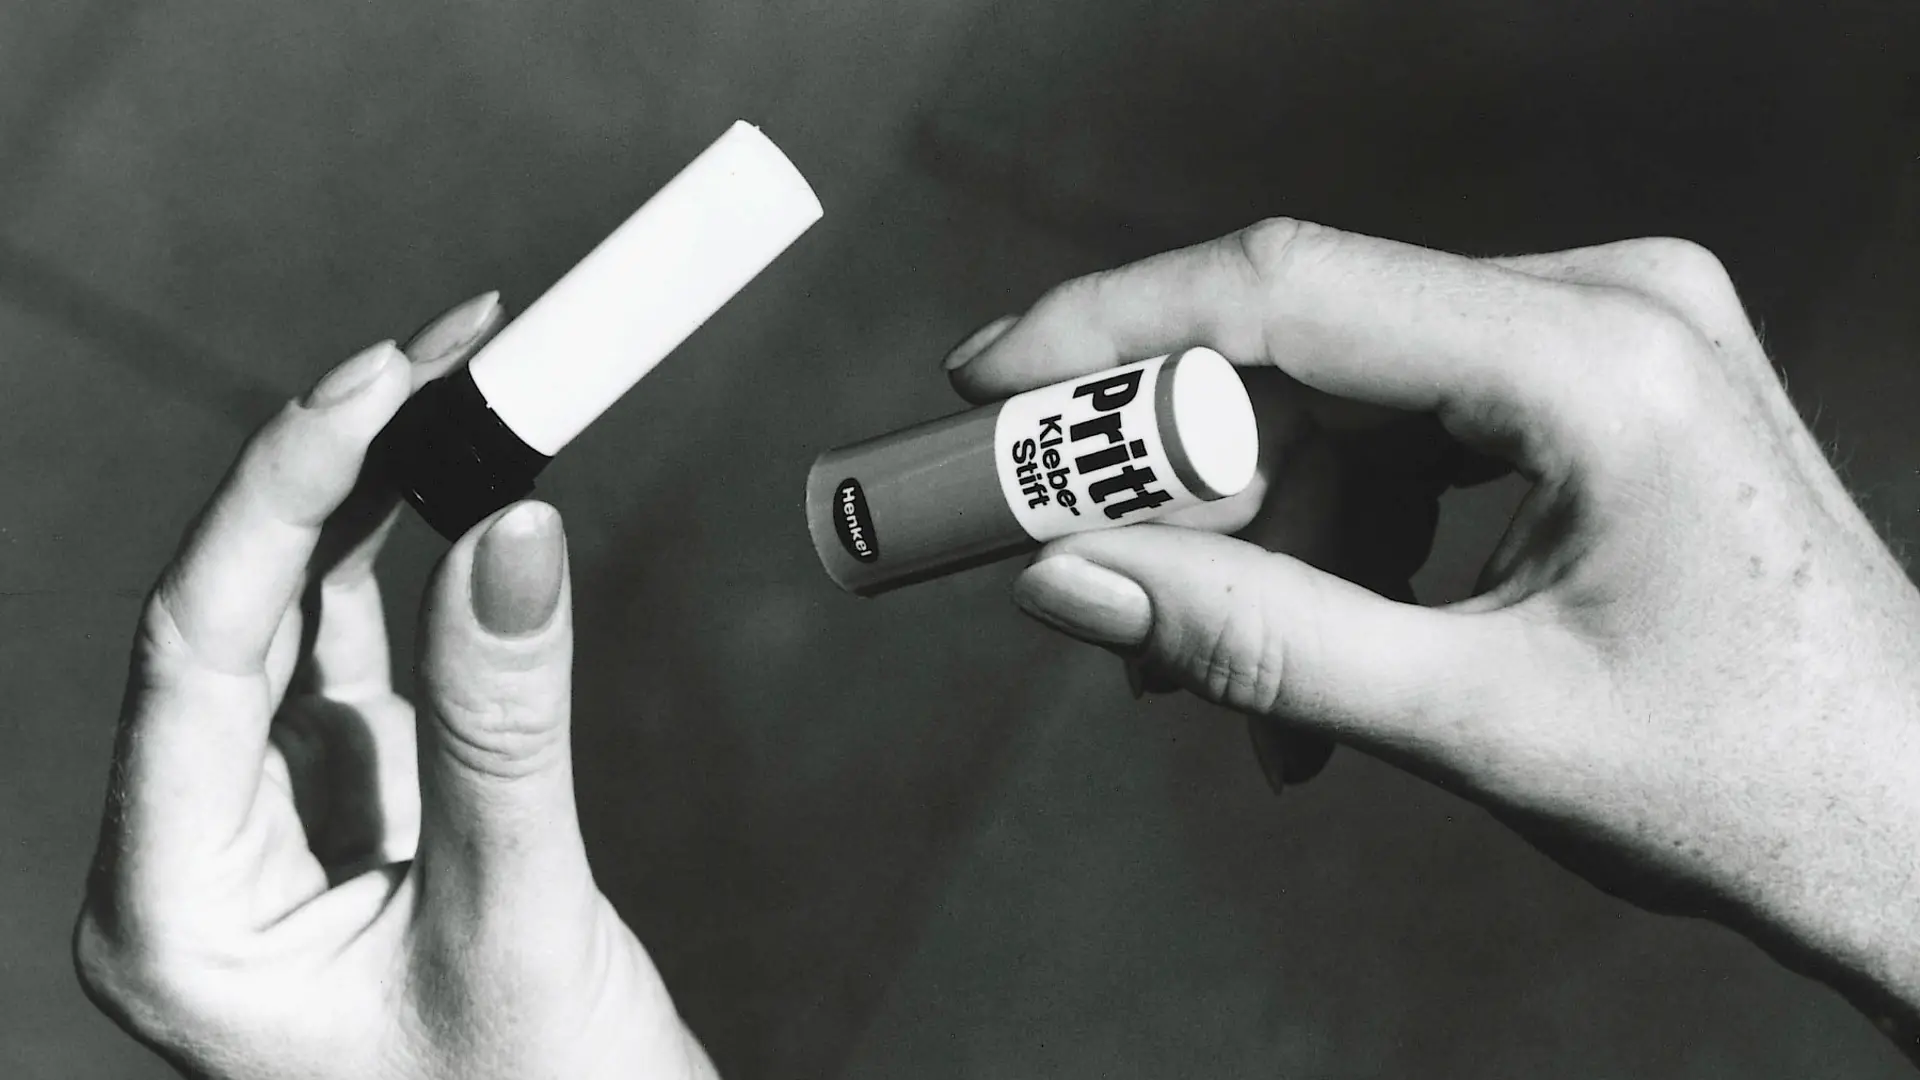 The adhesive innovation: The first Pritt glue stick from Henkel.